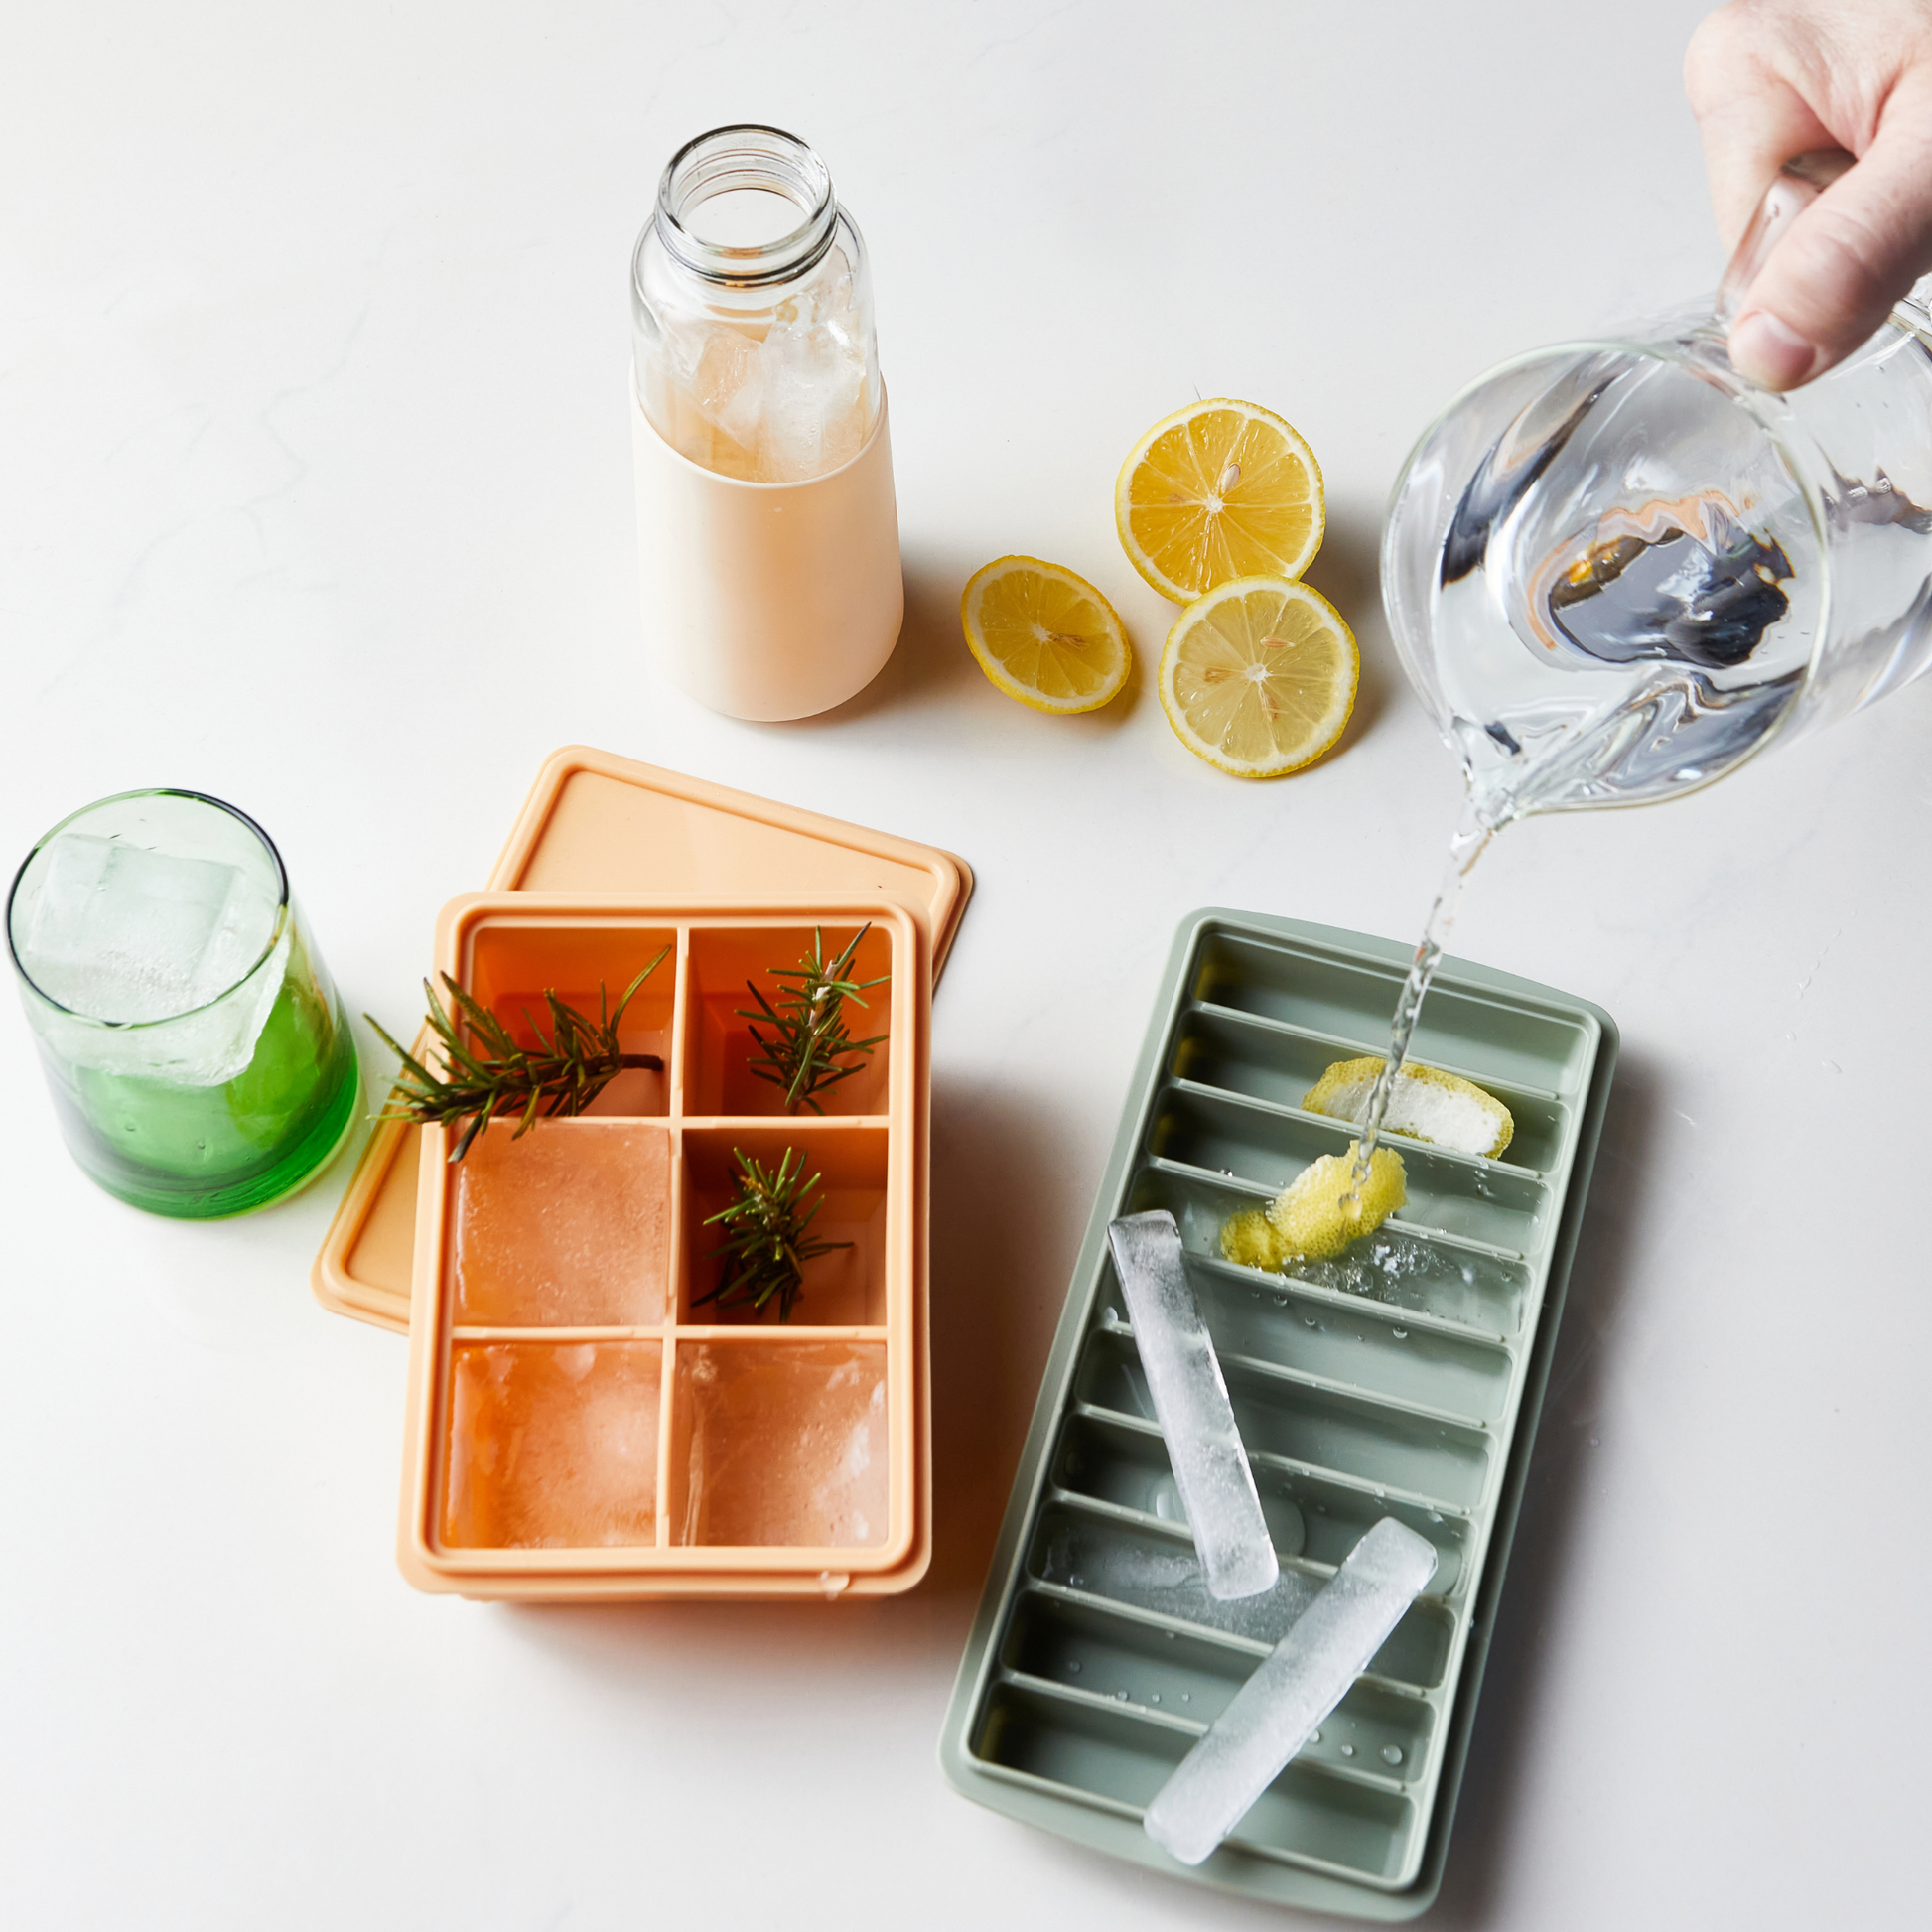 Large Ice Cube Tray with Lid